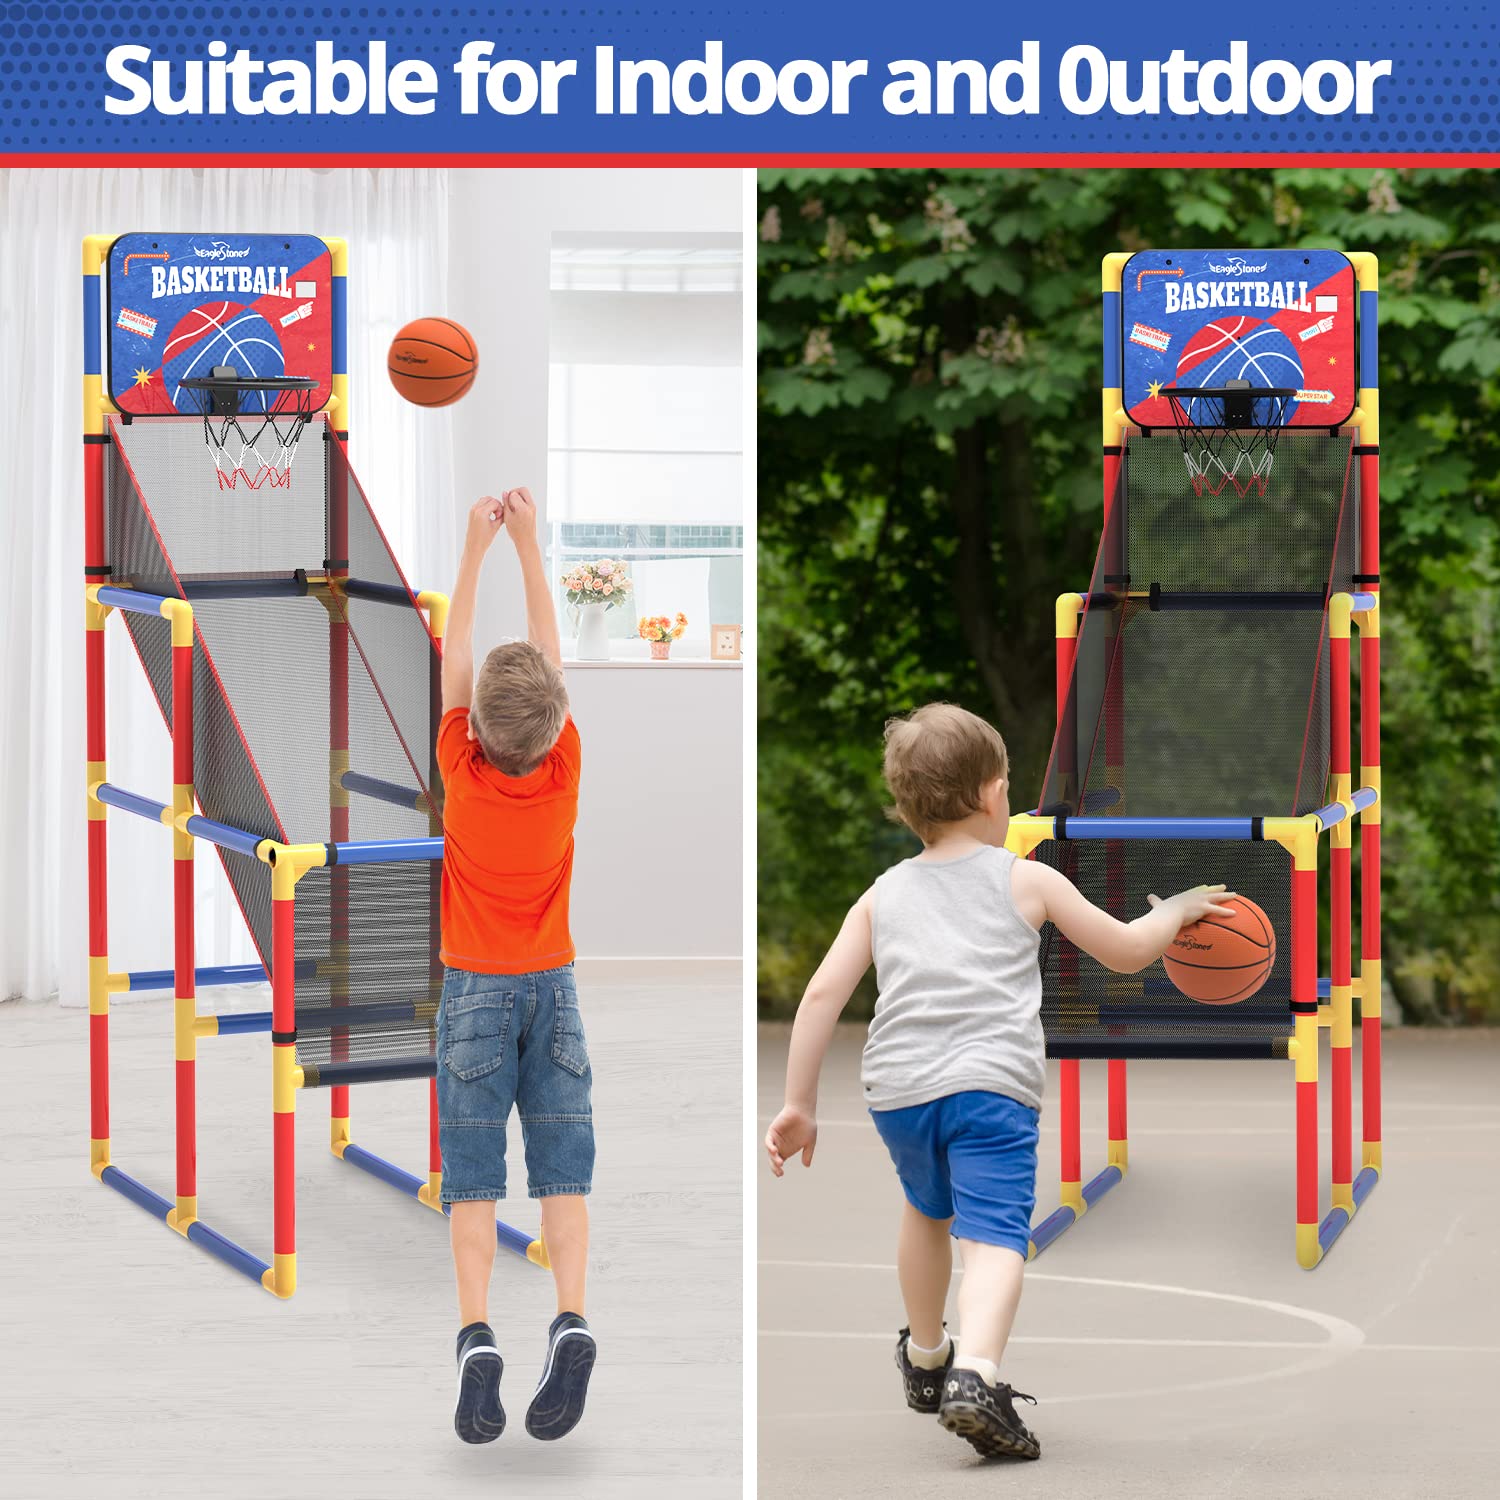 EagleStone Basketball Hoop Arcade Game Indoor W/Electronic Scoreboard, Basketball Hoop Outdoor for Kids with 4 Balls, Cheer Sound. Toddler Basketball Sports Toys, Basketball Gift for Boys & Girls…